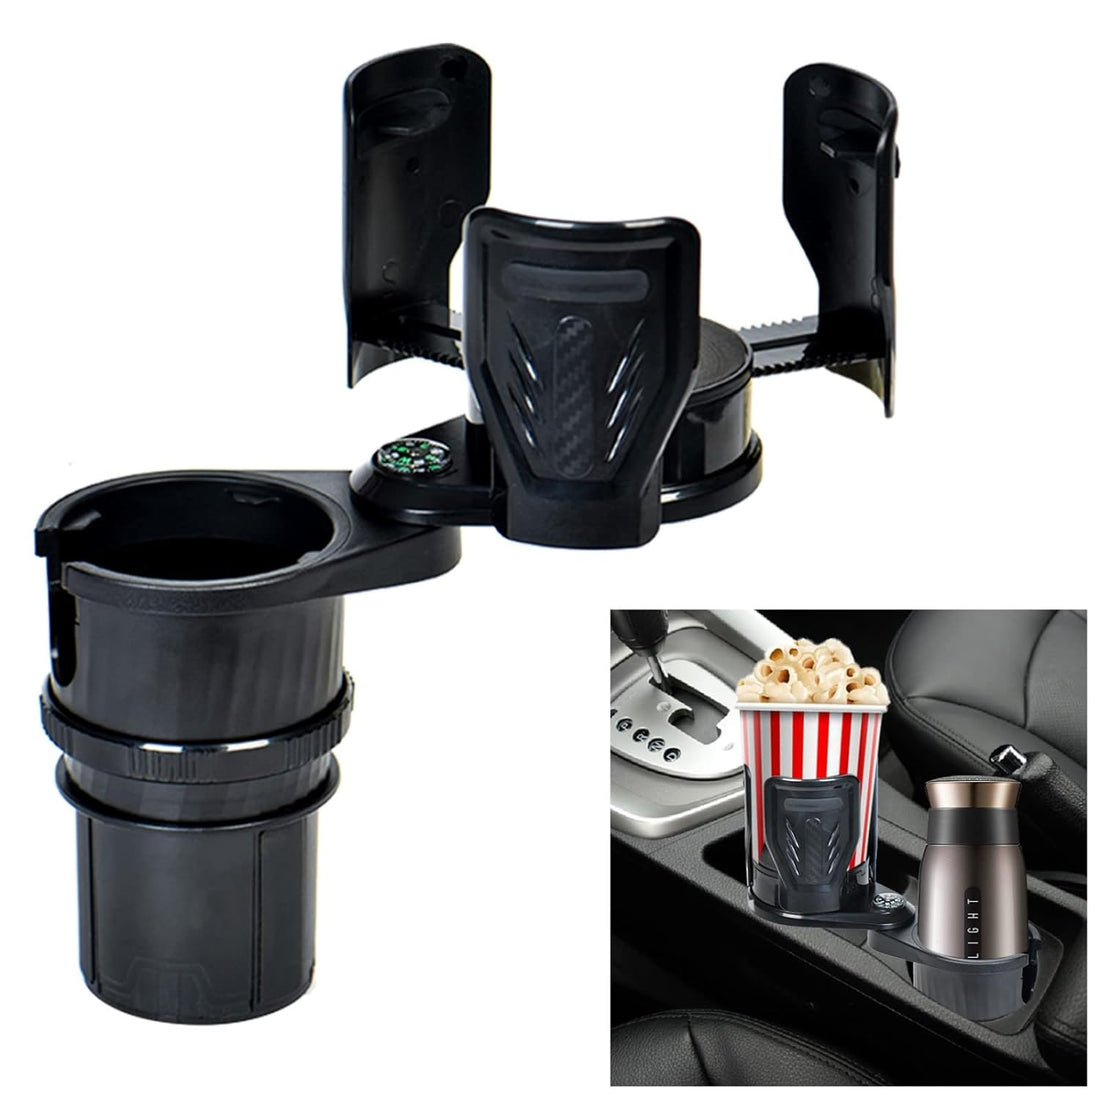 Biuvamla Dual Cup Holder Expander for Car with Adjustable Base, Expandable Large Cup Holders with Car Compass, Compatible with 20 oz. Other Bottles in 2.8-5.9in (Black)